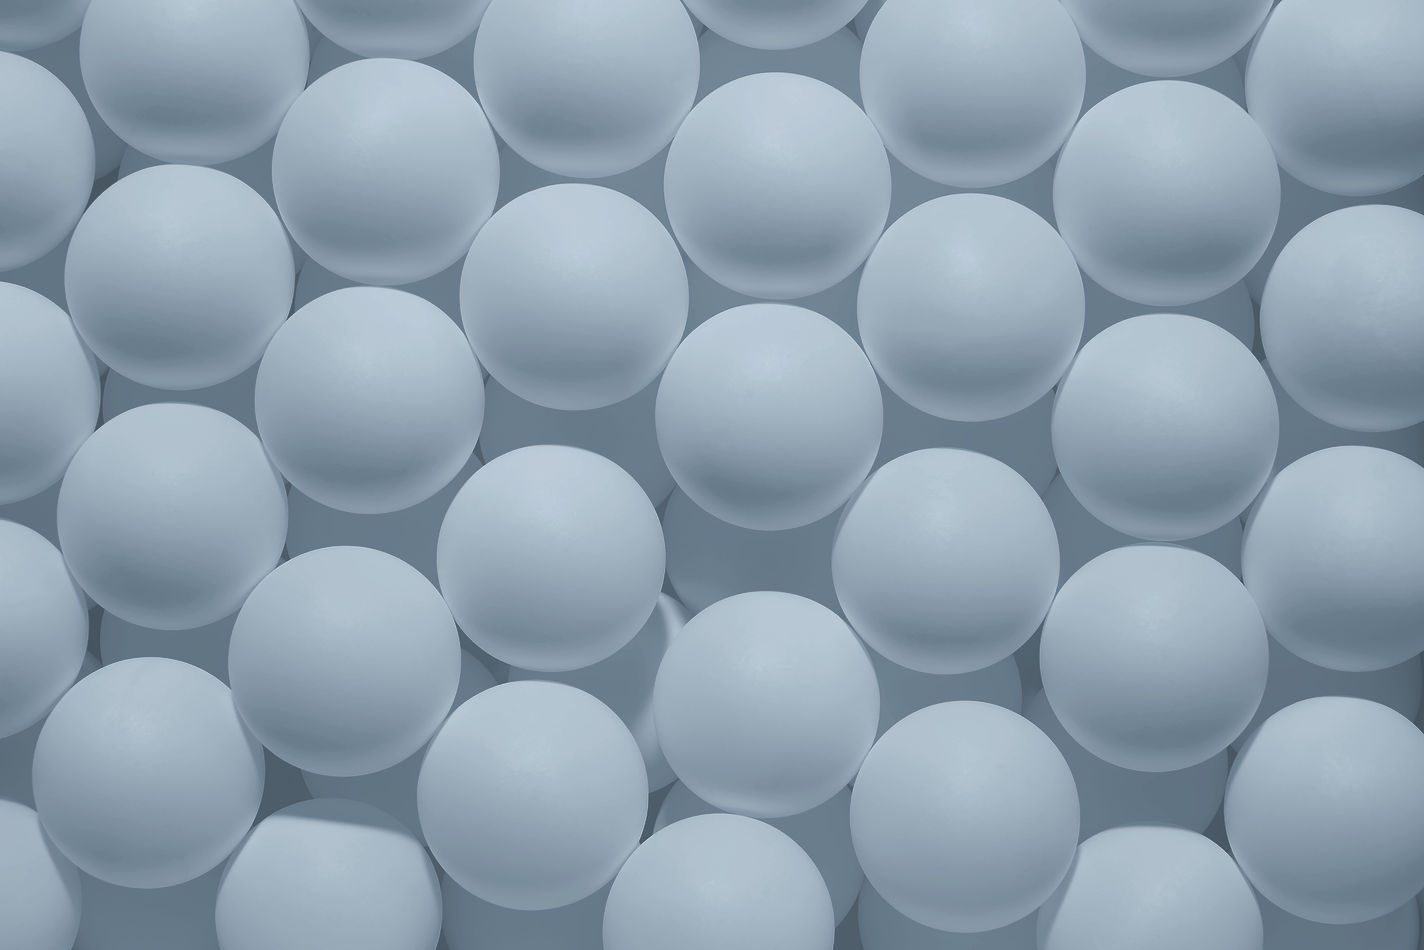 Series of white stacked spheres